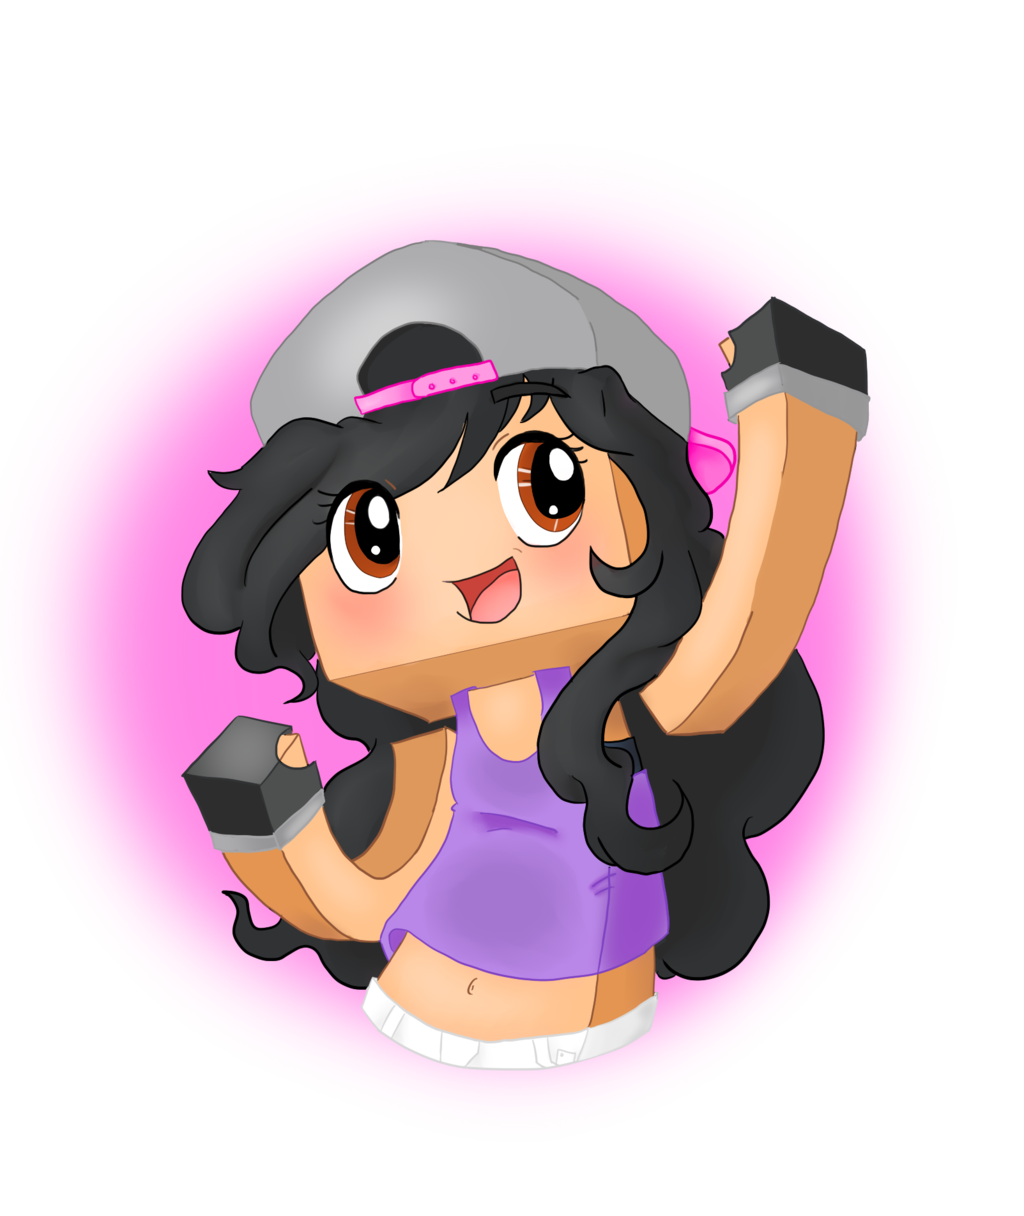 Gaming clipart person. Aphmau minecraft fanart by